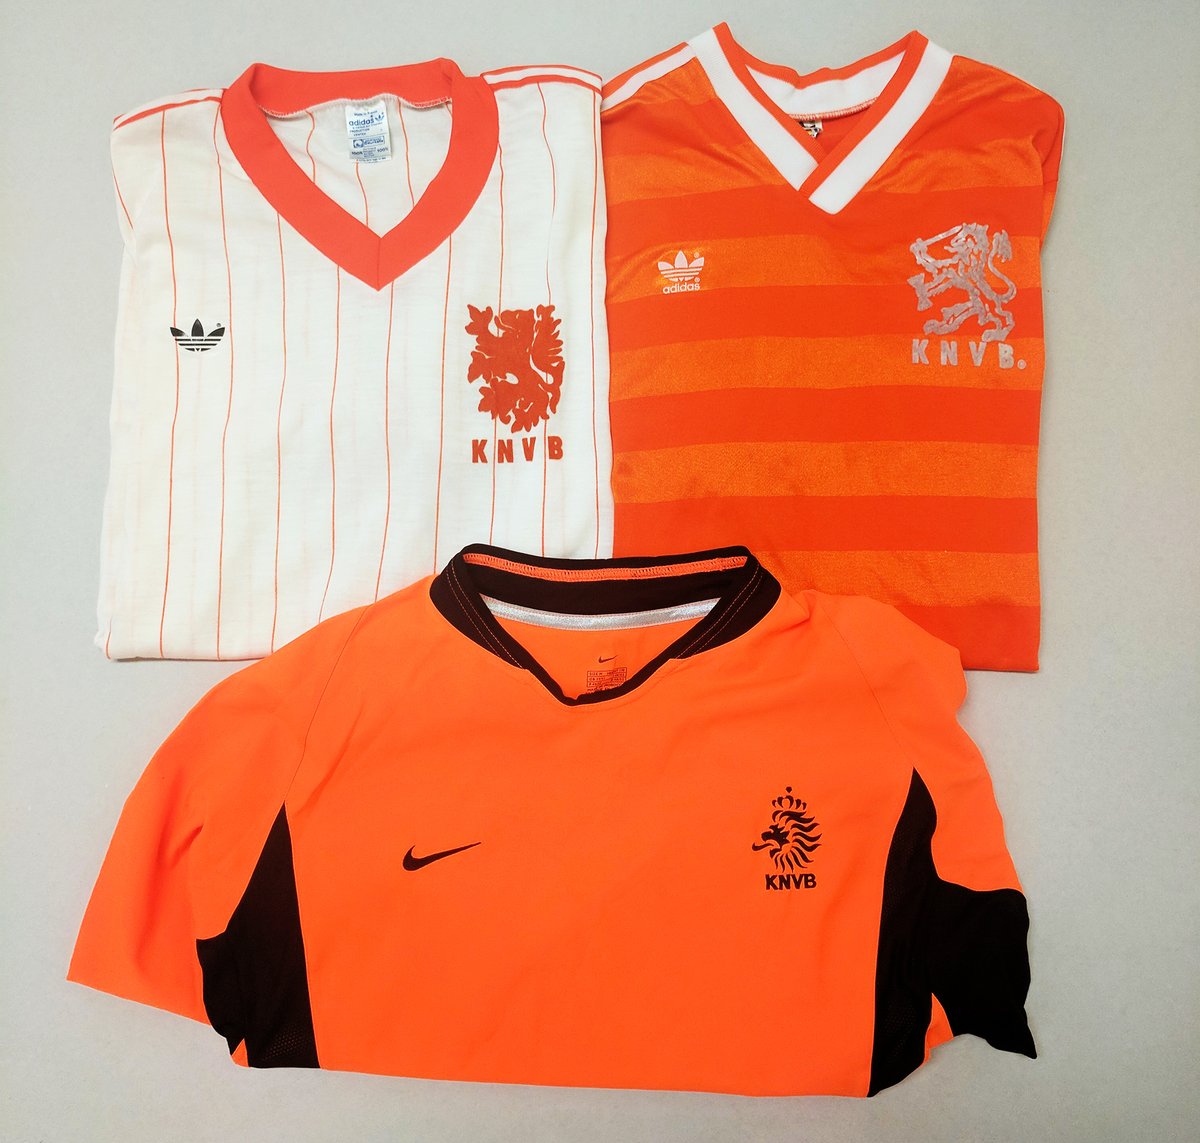 When They Didn't Qualify | Here Are Netherlands' Prospected World Cup